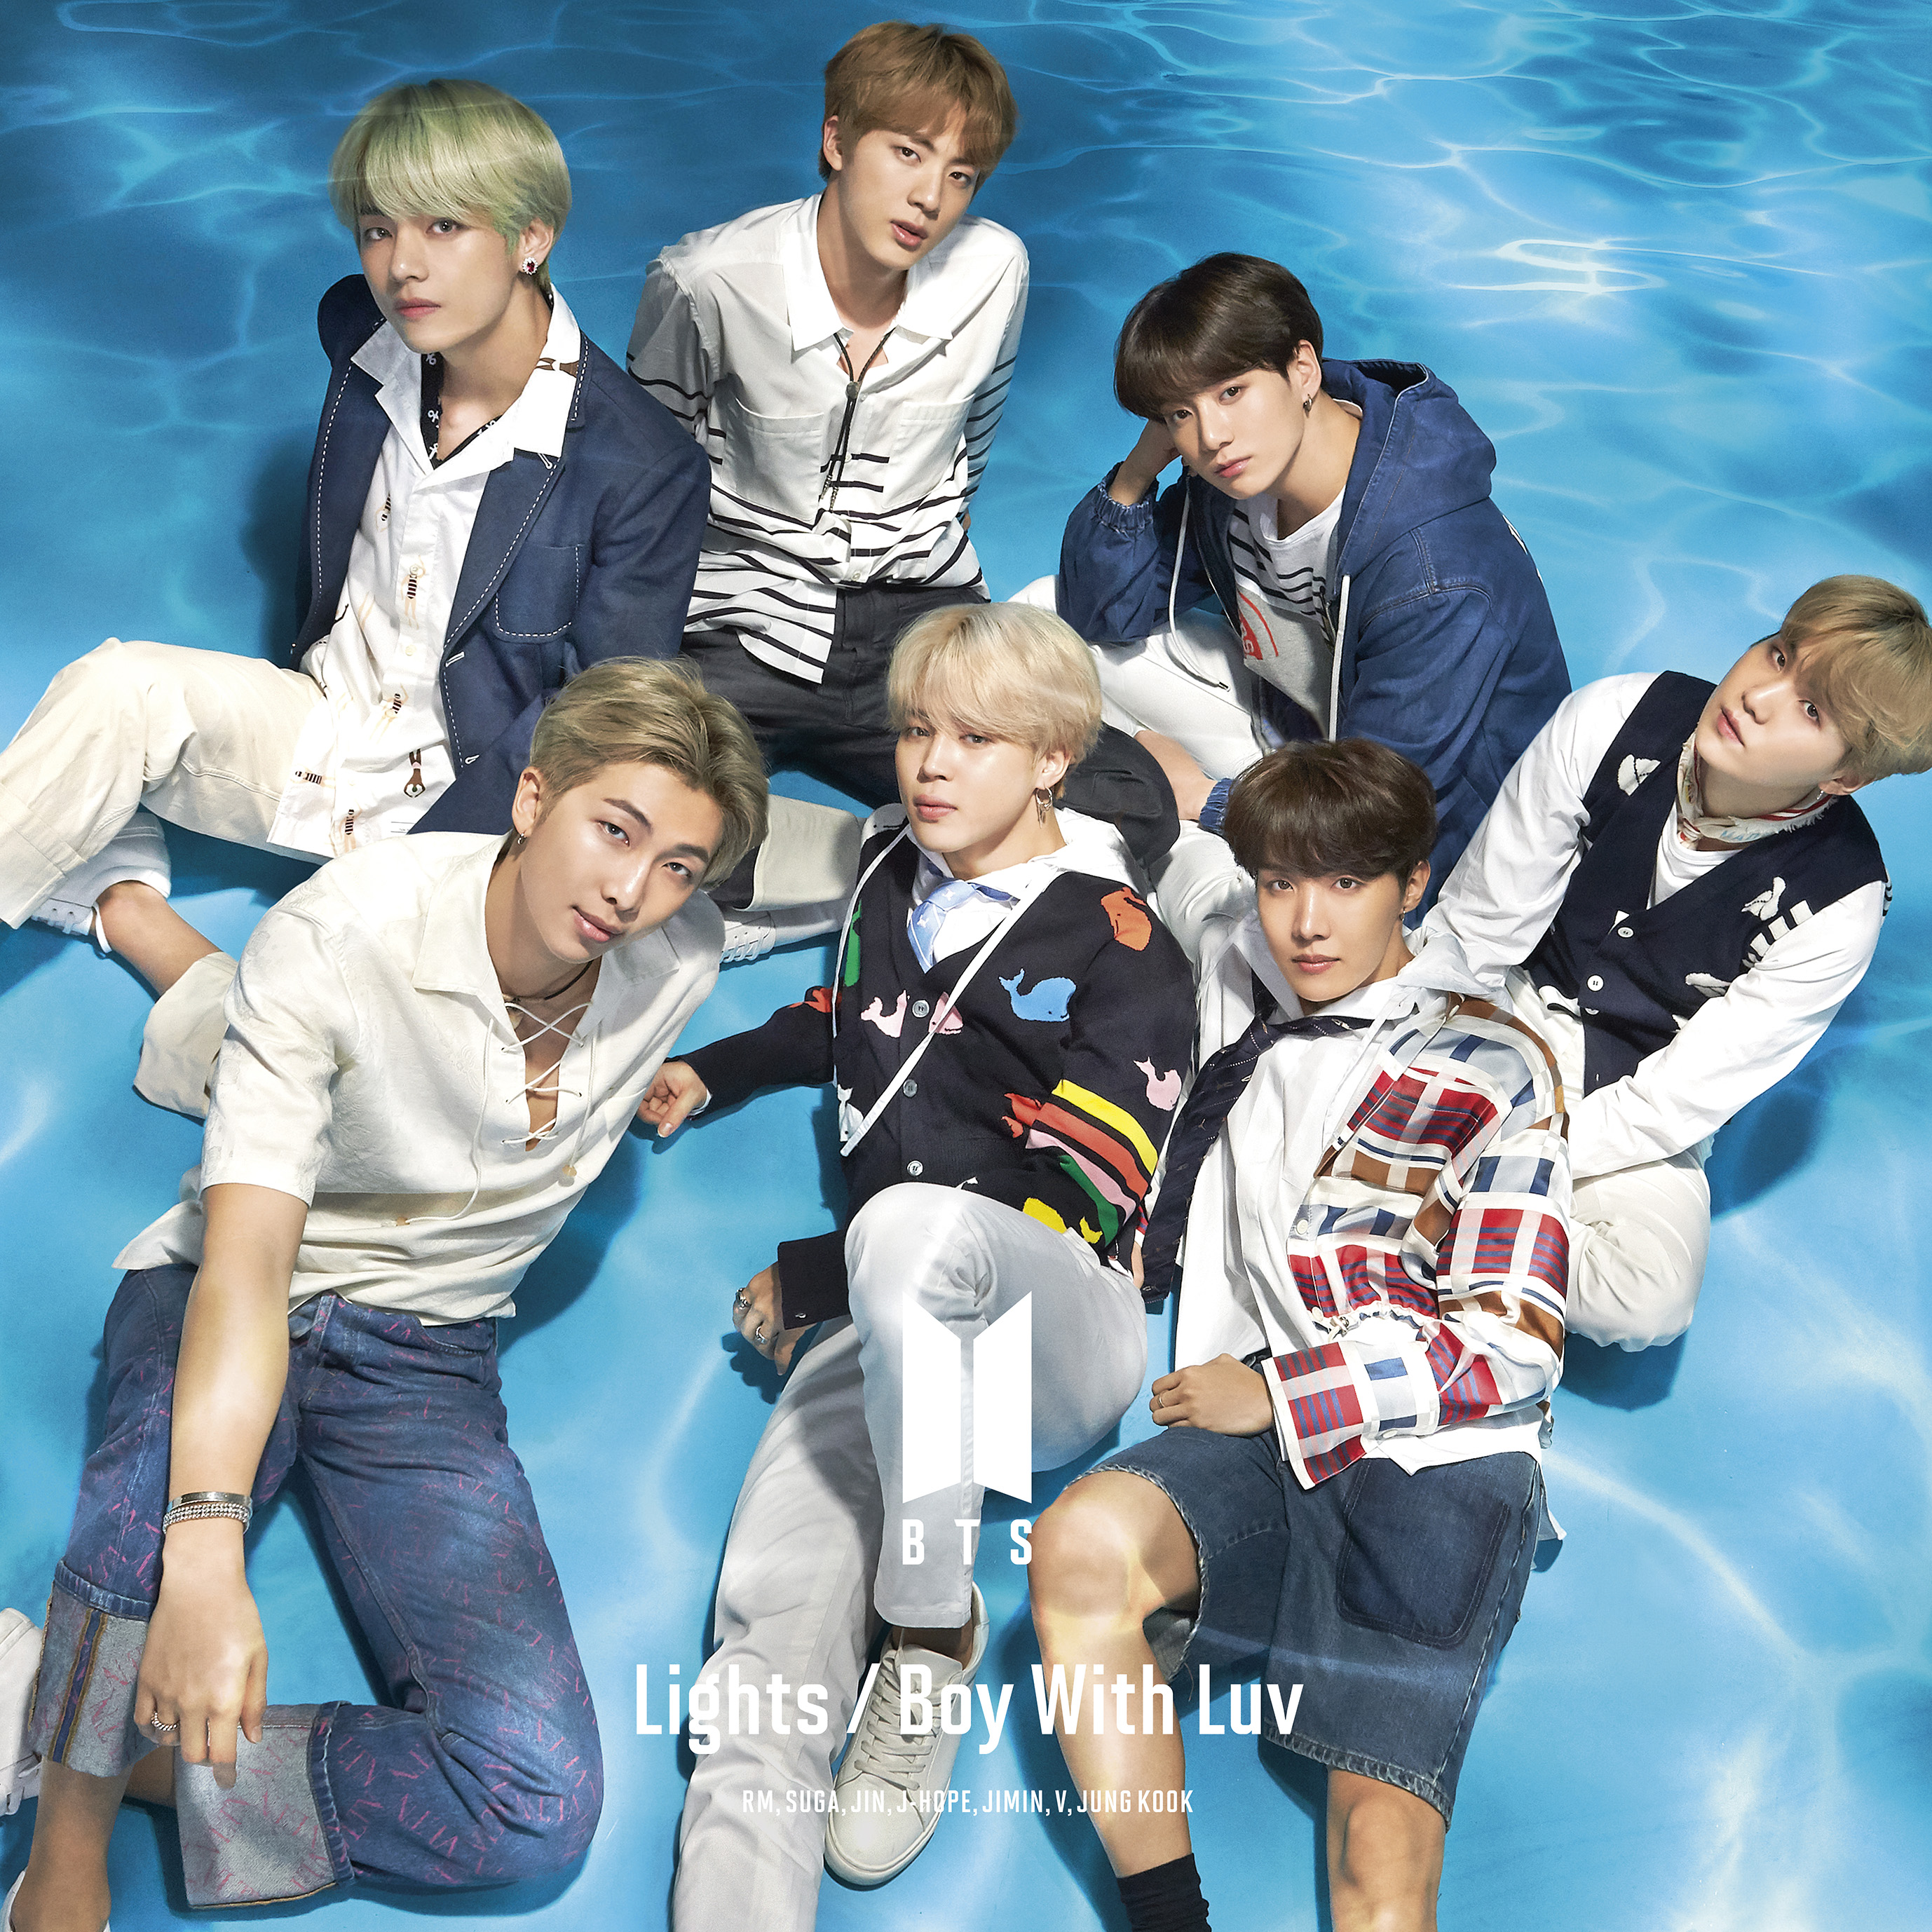 Lights/Boy With Luv【CD MAXI】【+DVD】 | BTS | UNIVERSAL MUSIC STORE